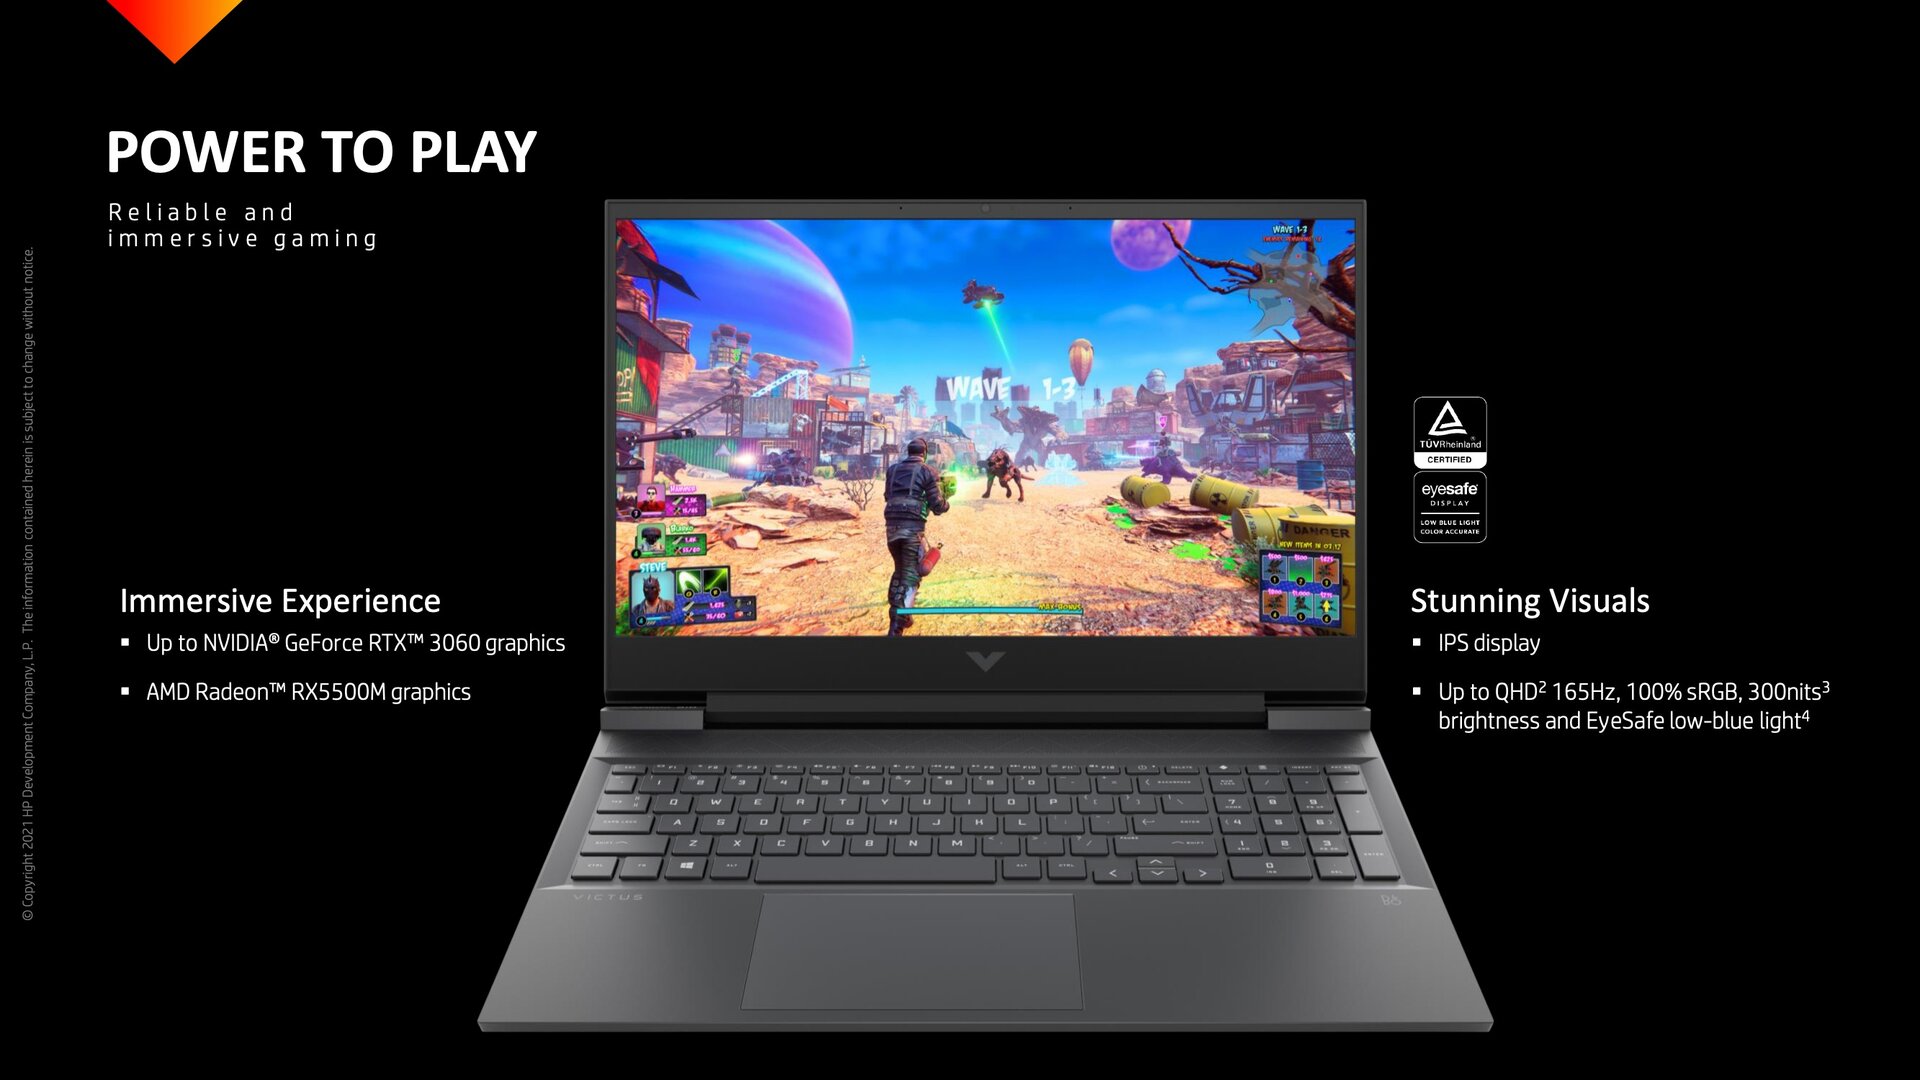 victus by hp 16 aims to make gaming more accessible with rtx 3060 and rx 5500m choices, will be available in intel and amd cpu options starting from us$800 - notebookcheck.net news